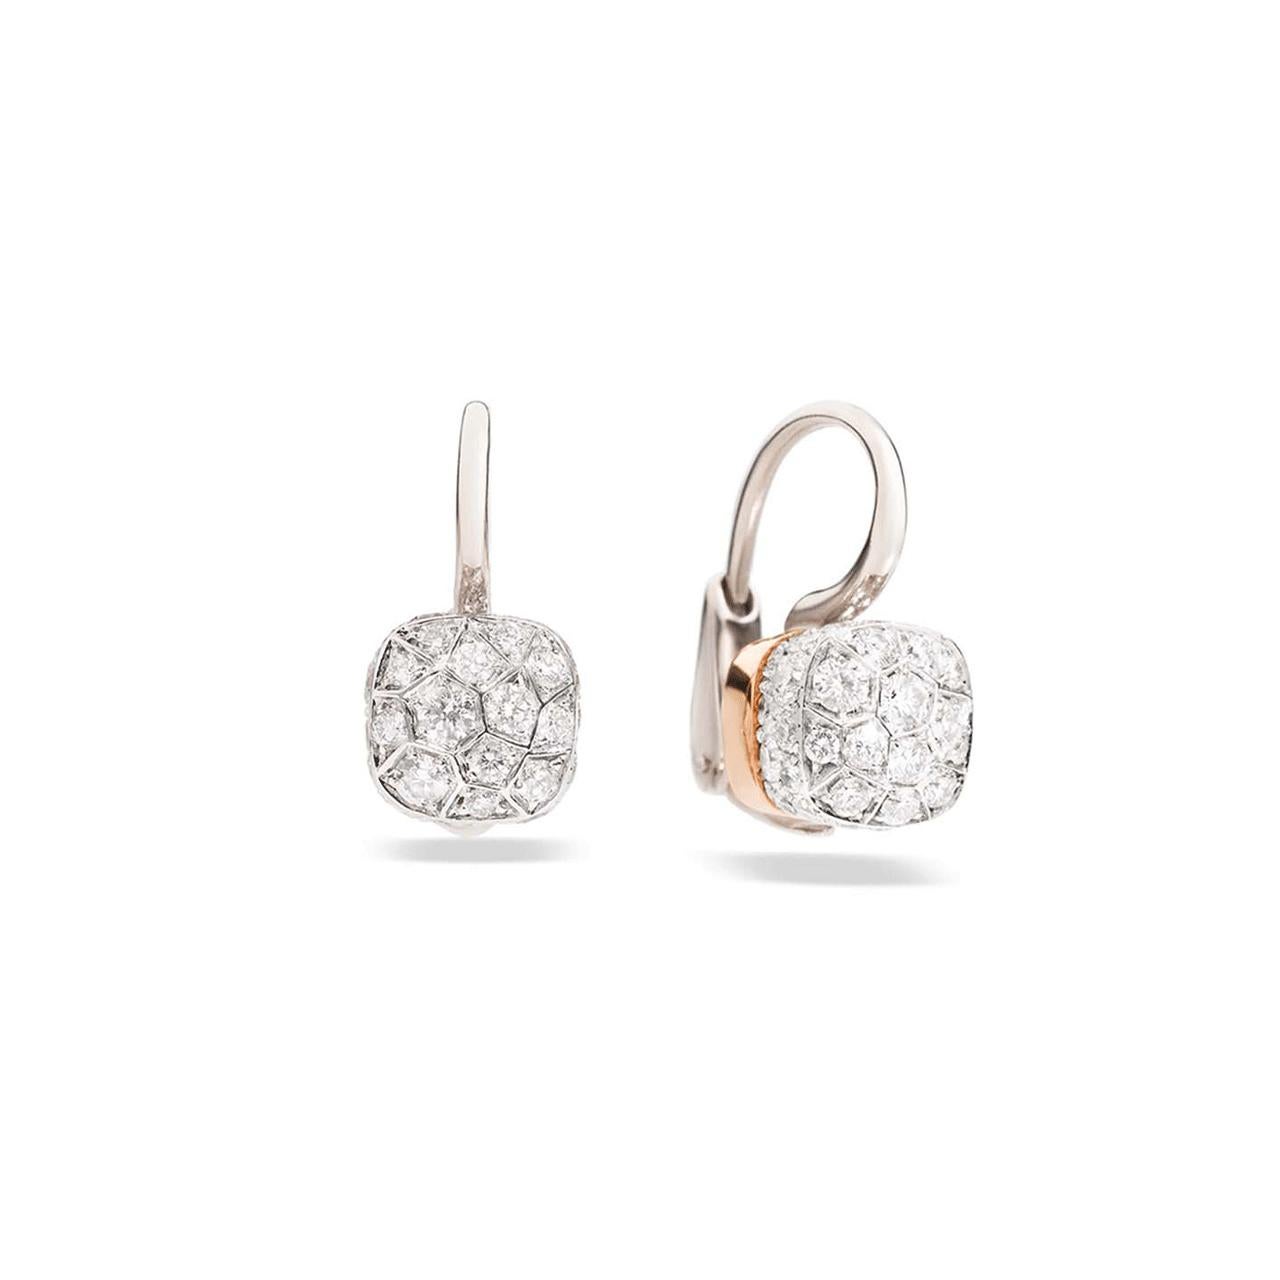 Earrings in the unmistakable Nudo silhouette featuring a precious pavé, making for doubly charming stones. Earrings in 18K white and rose gold, diamonds .84 ct.